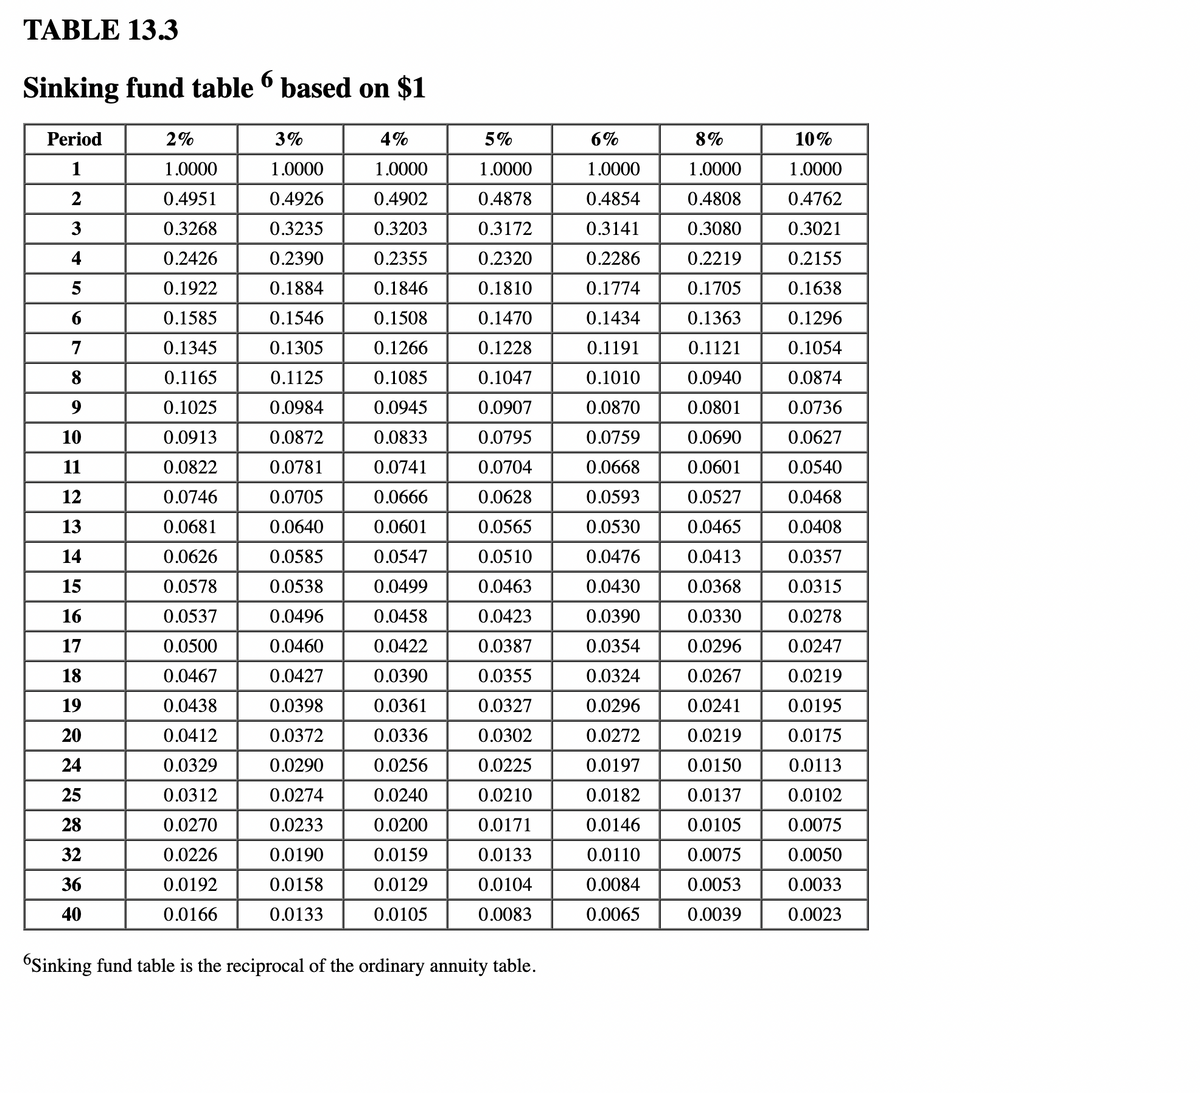 TABLE 13.3
6
Sinking fund table based on $1
Period
1
2
3
4
5
6
7
8
9
10
11
12
13
14
15
16
17
18
19
20
24
25
28
32
36
40
2%
1.0000
0.4951
0.3268
0.2426
0.1922
0.1585
0.1345
0.1165
0.1025
0.0913
0.0822
0.0746
0.0681
0.0626
0.0578
0.0537
0.0500
0.0467
0.0438
0.0412
0.0329
0.0312
0.0270
0.0226
0.0192
0.0166
3%
1.0000
0.4926
0.3235
0.2390
0.1884
0.1546
0.1305
0.1125
0.0984
0.0872
0.0781
0.0705
0.0640
0.0585
0.0538
0.0496
0.0460
0.0427
0.0398
0.0372
0.0290
0.0274
0.0233
0.0190
0.0158
0.0133
4%
1.0000
0.4902
0.3203
0.2355
0.1846
0.1508
0.1266
0.1085
0.0945
0.0833
0.0741
0.0666
0.0601
0.0547
0.0499
0.0458
0.0422
0.0390
0.0361
0.0336
0.0256
0.0240
0.0200
0.0159
0.0129
0.0105
5%
1.0000
0.4878
0.3172
0.2320
0.1810
0.1470
0.1228
0.1047
0.0907
0.0795
0.0704
0.0628
0.0565
0.0510
0.0463
0.0423
0.0387
0.0355
0.0327
0.0302
0.0225
0.0210
0.0171
0.0133
0.0104
0.0083
"Sinking fund table is the reciprocal of the ordinary annuity table.
6%
1.0000
0.4854
0.3141
0.2286
0.1774
0.1434
0.1191
0.1010
0.0870
0.0759
0.0668
0.0593
0.0530
0.0476
0.0430
0.0390
0.0354
0.0324
0.0296
0.0272
0.0197
0.0182
0.0146
0.0110
0.0084
0.0065
8%
1.0000
0.4808
0.3080
0.2219
0.1705
0.1363
0.1121
0.0940
0.0801
0.0690
0.0601
0.0527
0.0465
0.0413
0.0368
0.0330
0.0296
0.0267
0.0241
0.0219
0.0150
0.0137
0.0105
0.0075
0.0053
0.0039
10%
1.0000
0.4762
0.3021
0.2155
0.1638
0.1296
0.1054
0.0874
0.0736
0.0627
0.0540
0.0468
0.0408
0.0357
0.0315
0.0278
0.0247
0.0219
0.0195
0.0175
0.0113
0.0102
0.0075
0.0050
0.0033
0.0023